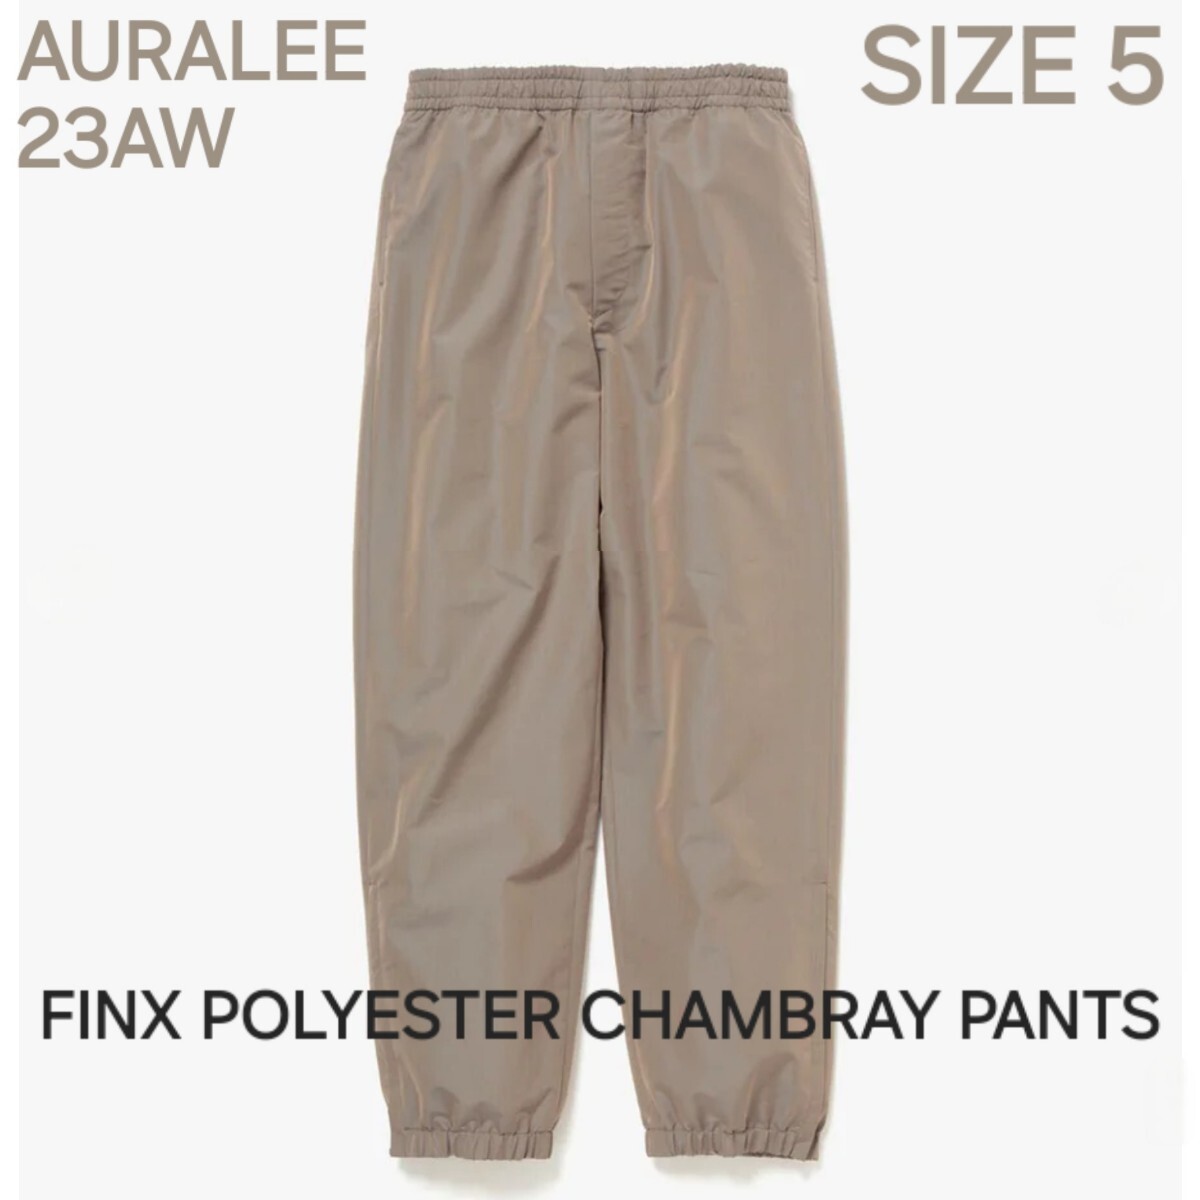 AURALEE オーラリー　23AW　FINX POLYESTER CHAMBRAY PANTS　A23AP03FP　SIZE 5_画像1